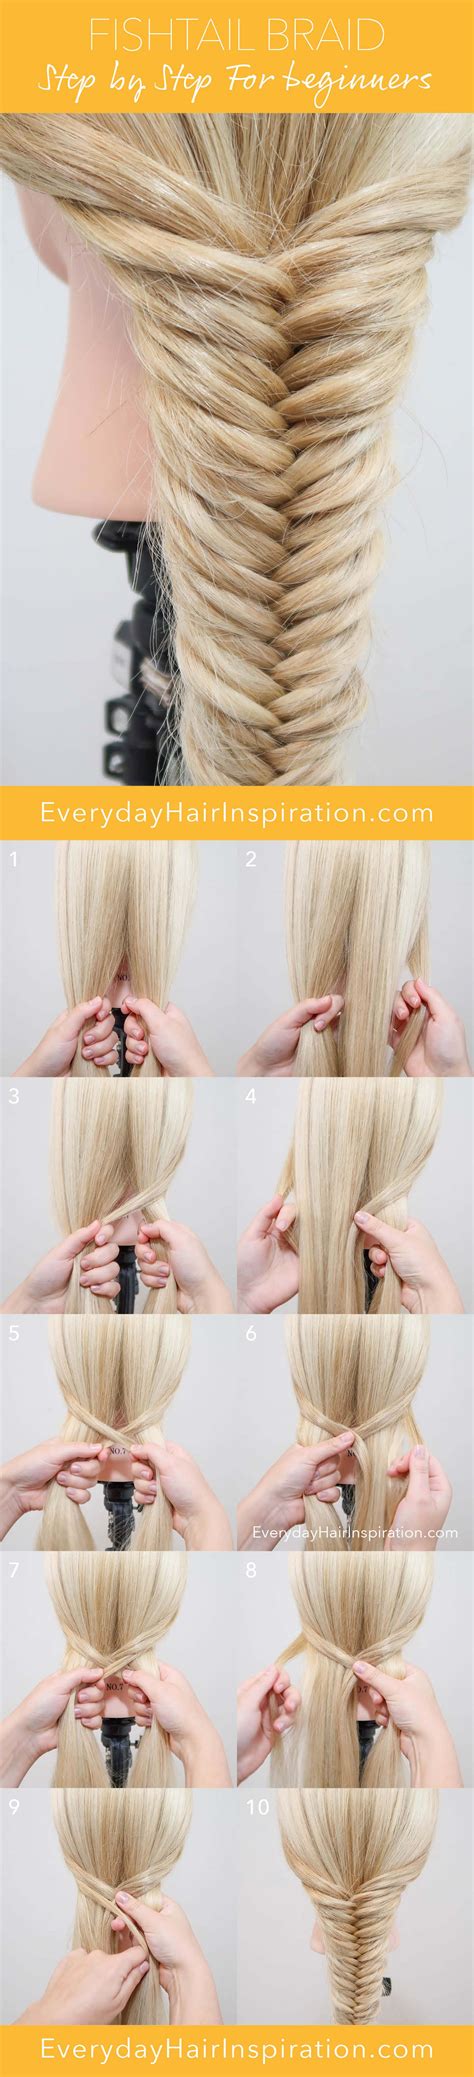 Perfect How To Fishtail Braid Hair For New Style